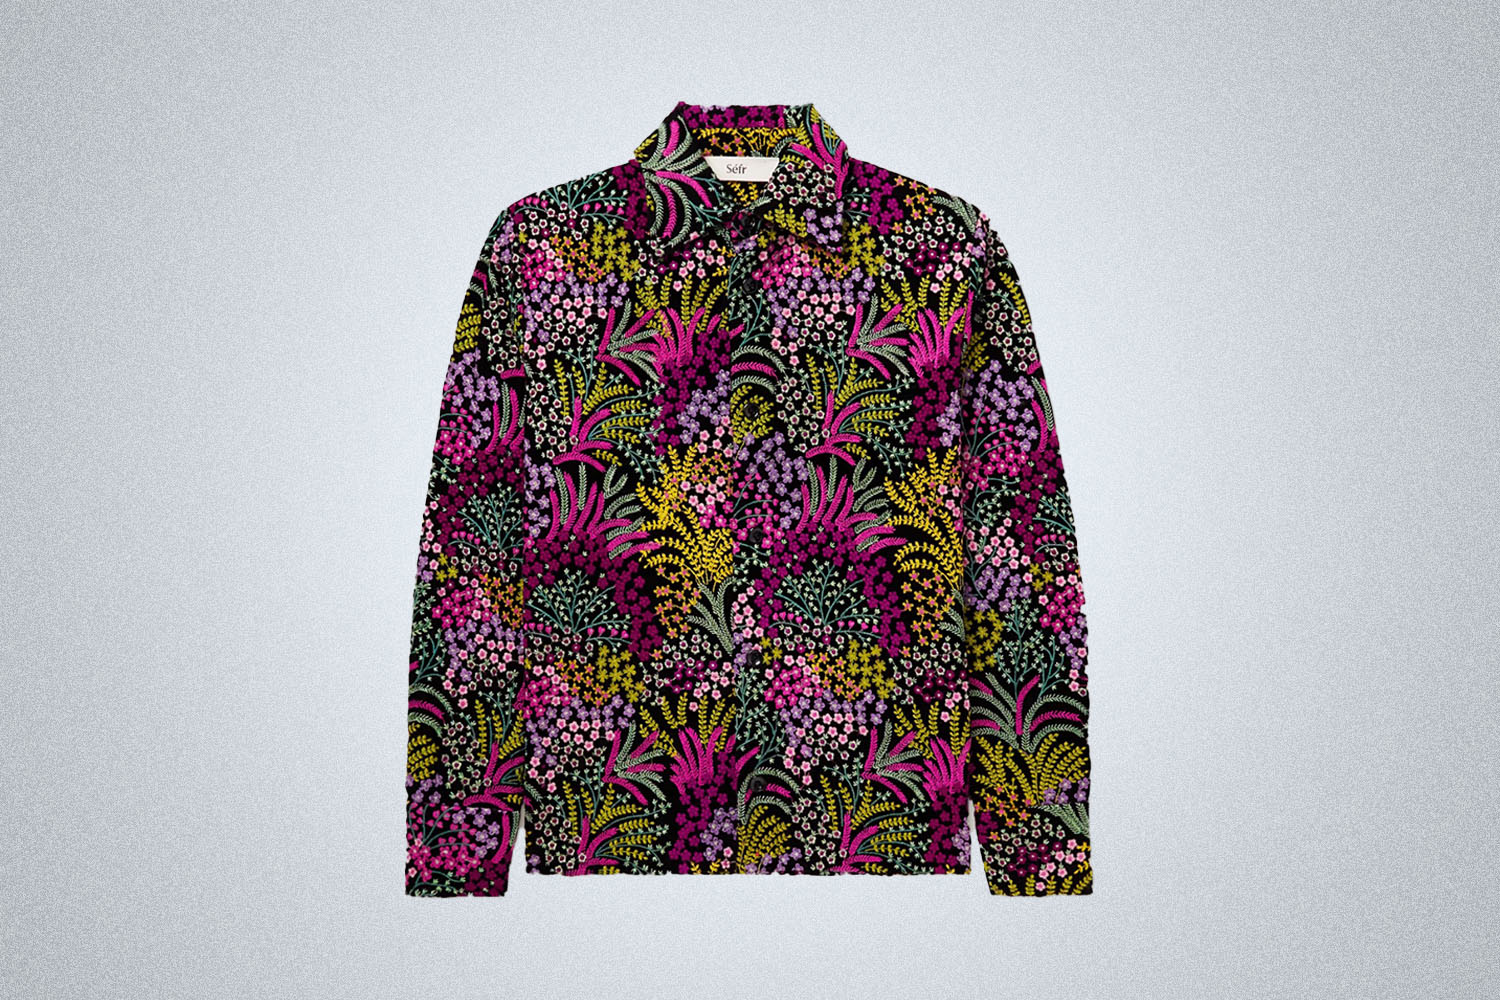 a black shirt with flower prints from Séfr on a grey background